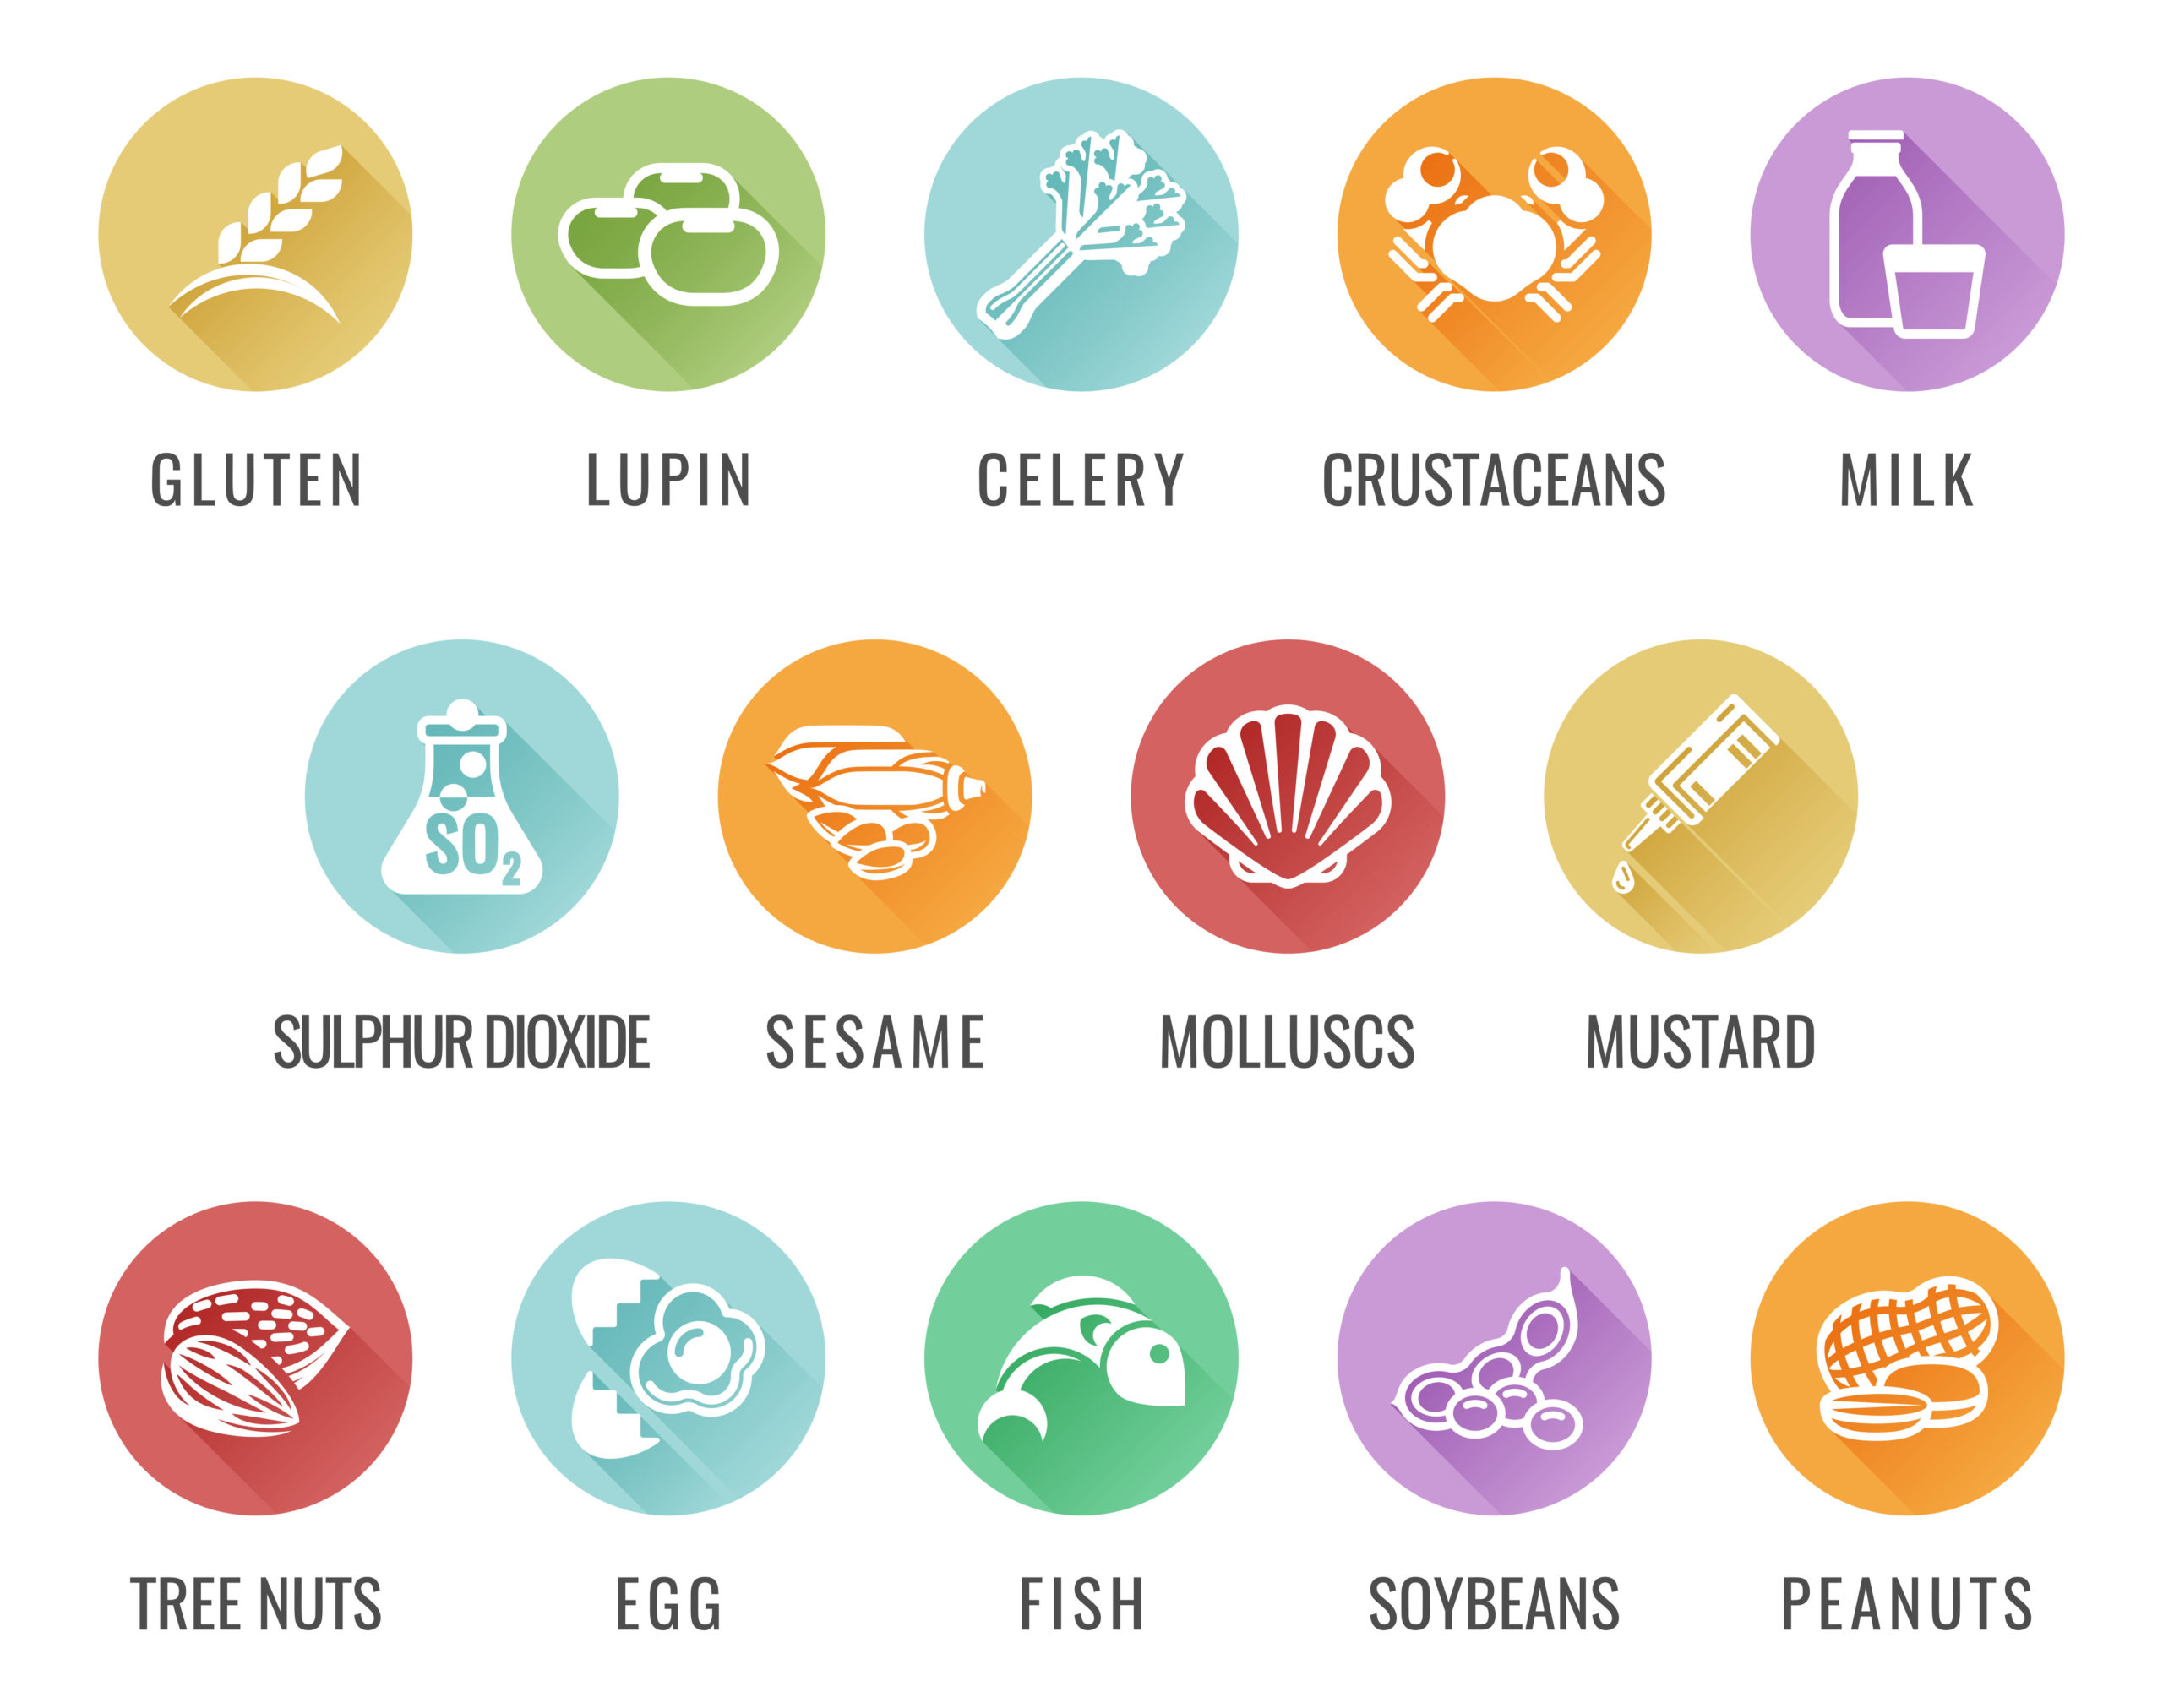 Your Guide to the Common Food Allergens Your Responsibility's